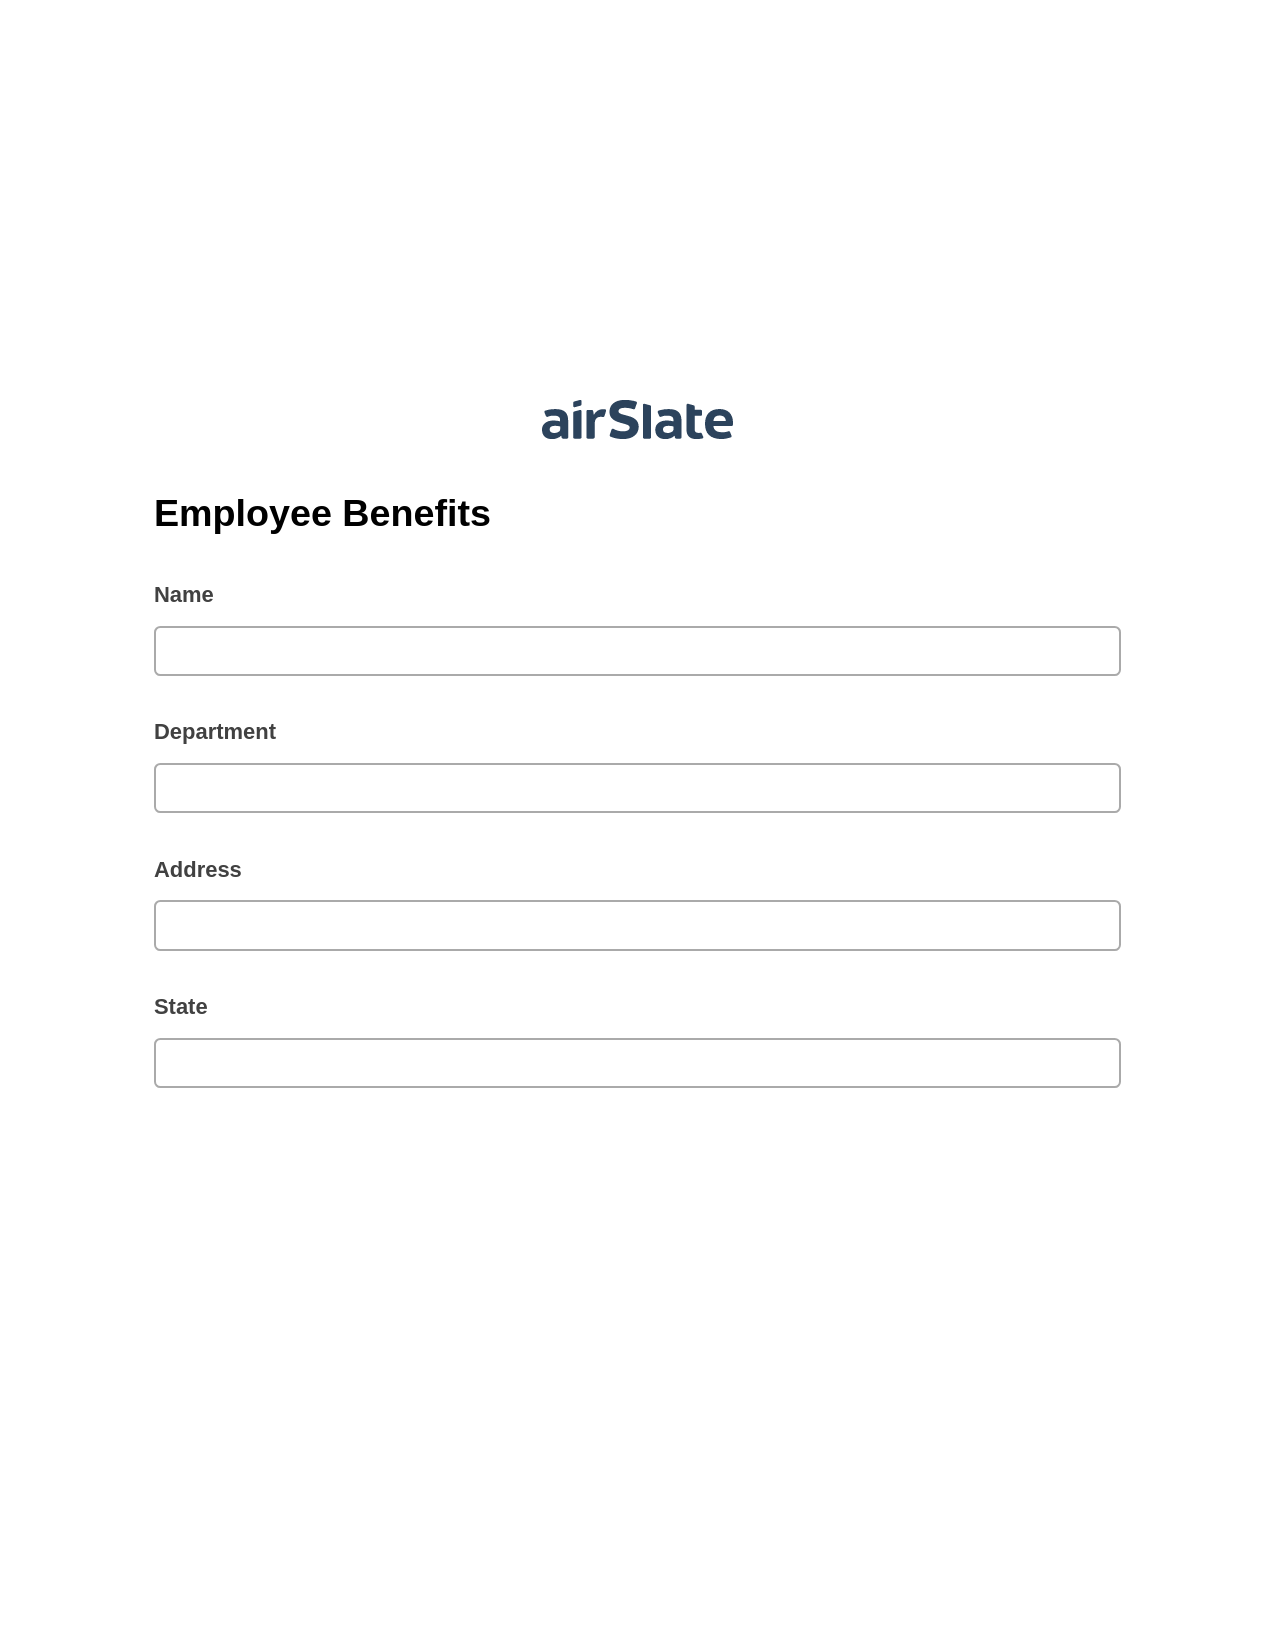 Employee Benefits Pre-fill Slate from MS Dynamics 365 Records Bot, Document Hide Bot, Export to MySQL Bot